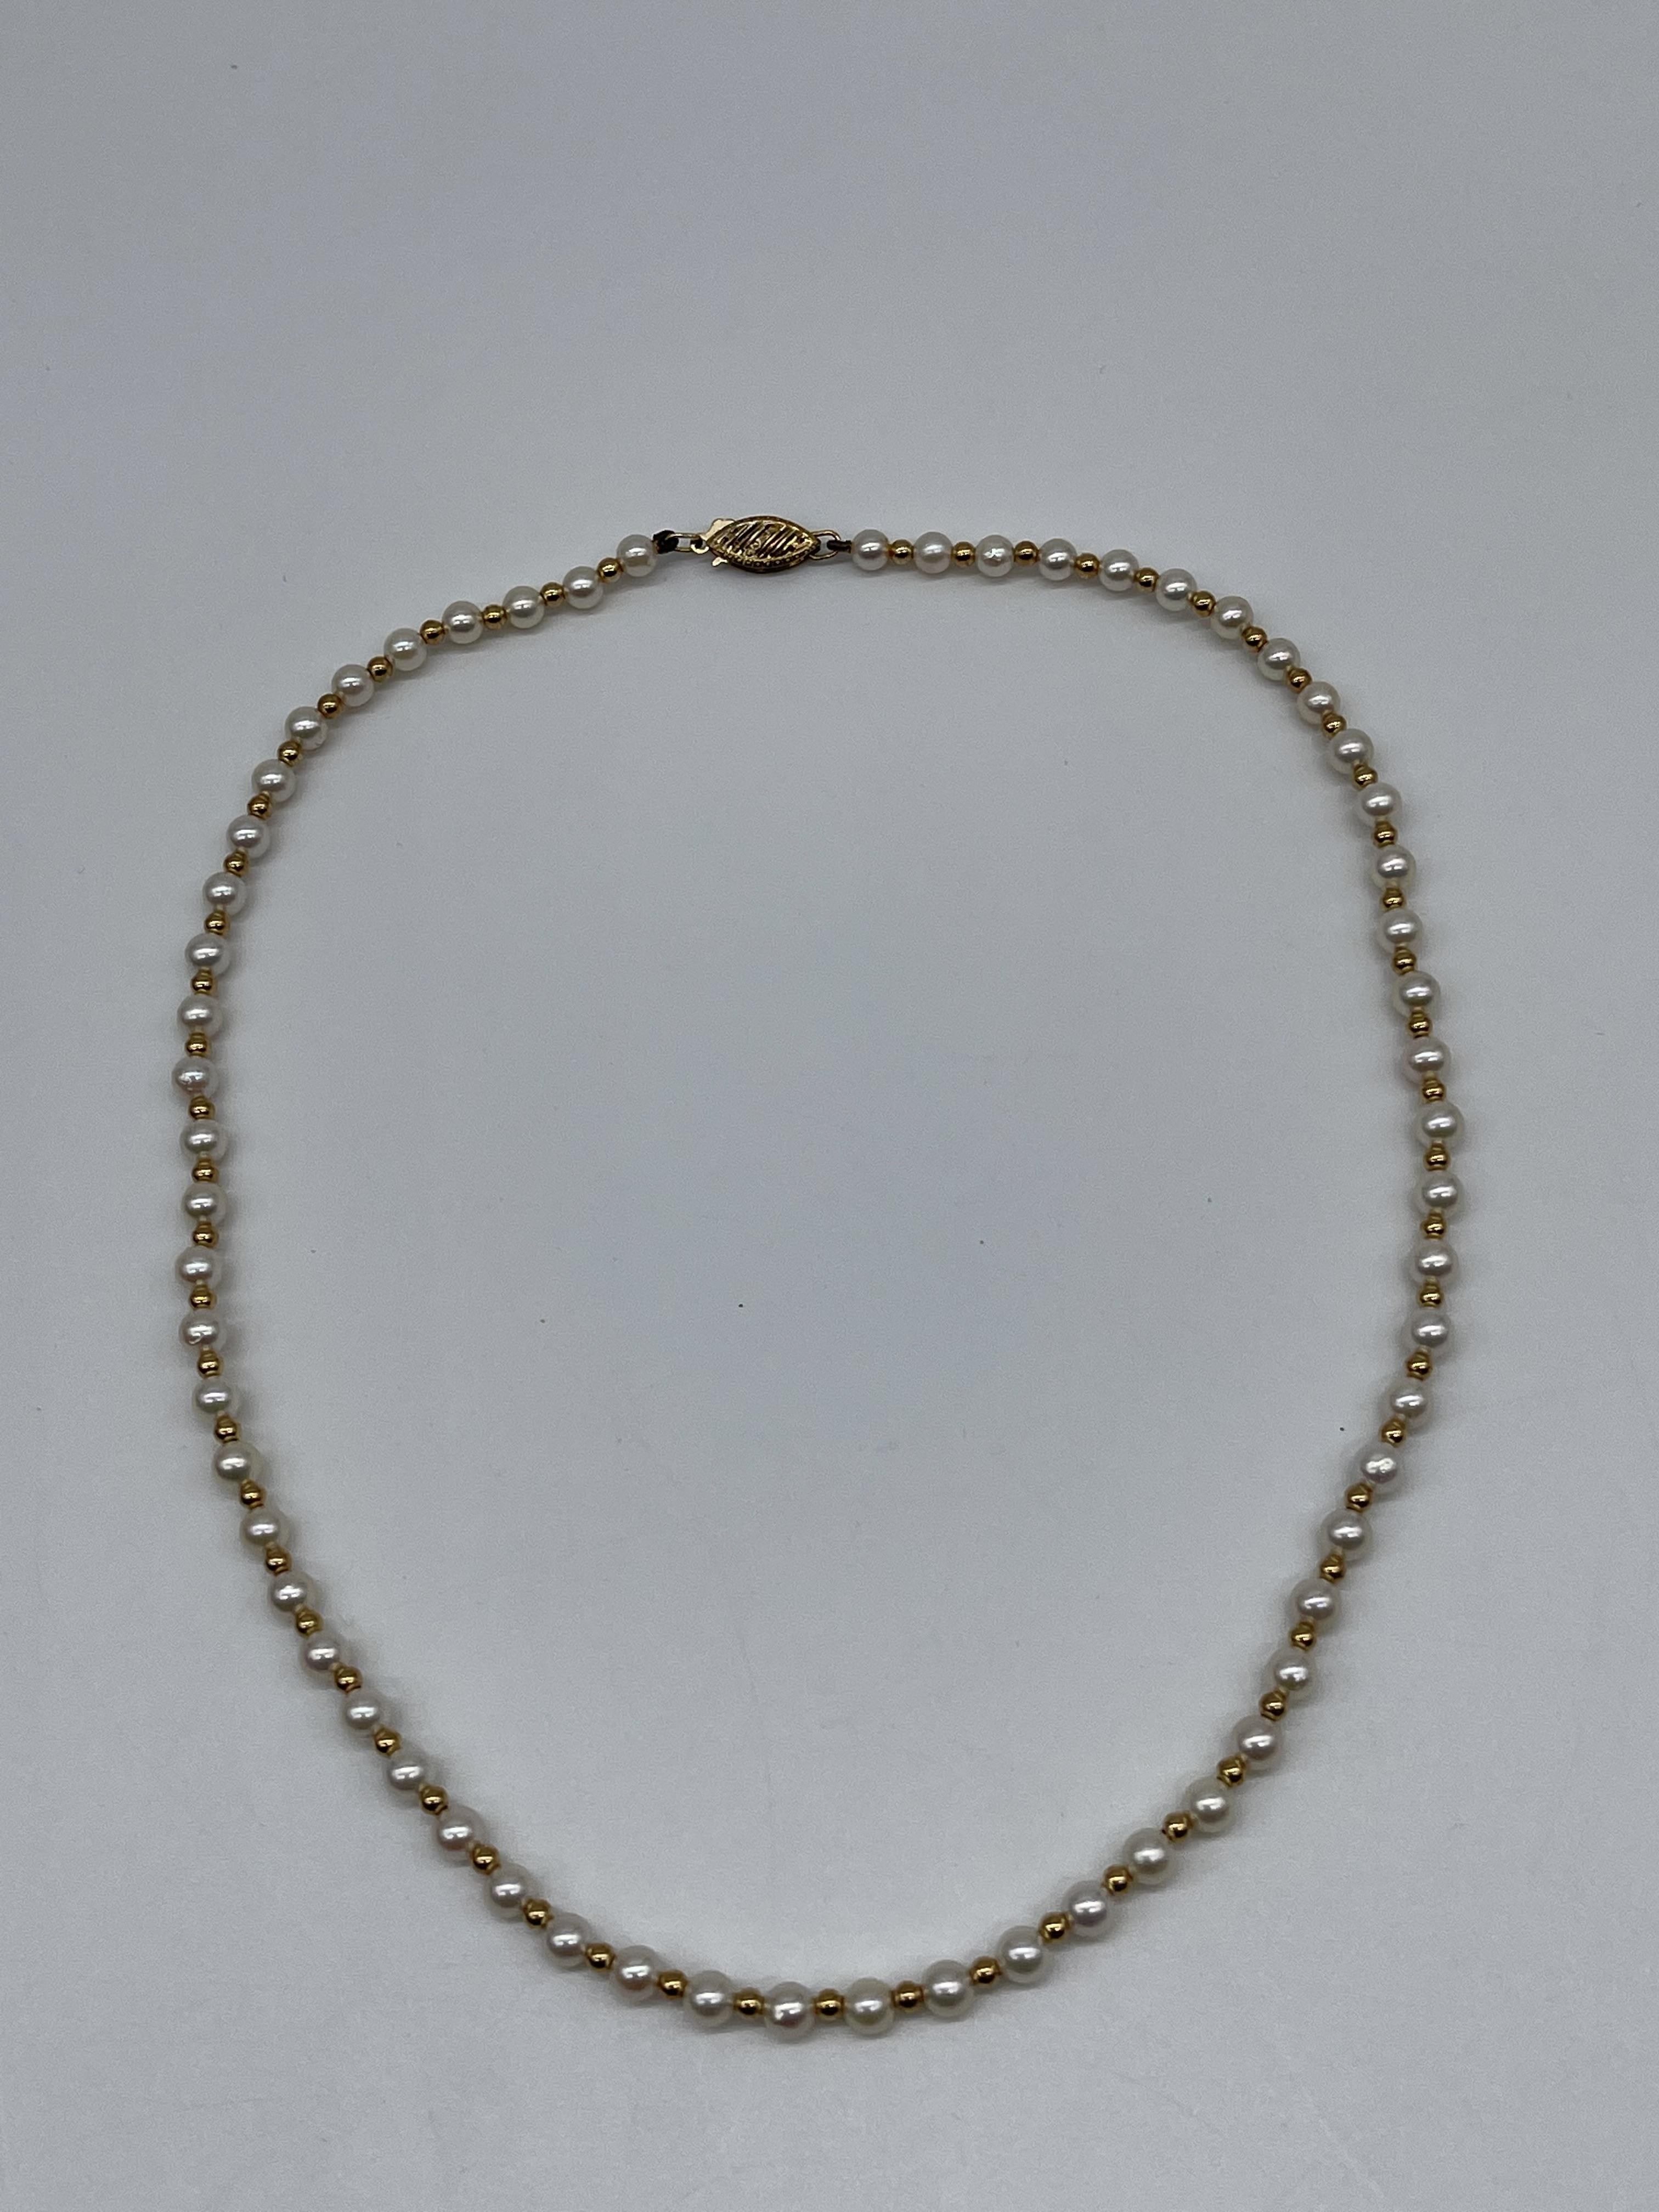 Cultured Pearl Necklace with 9ct Gold Clasp and 9c - Image 2 of 6